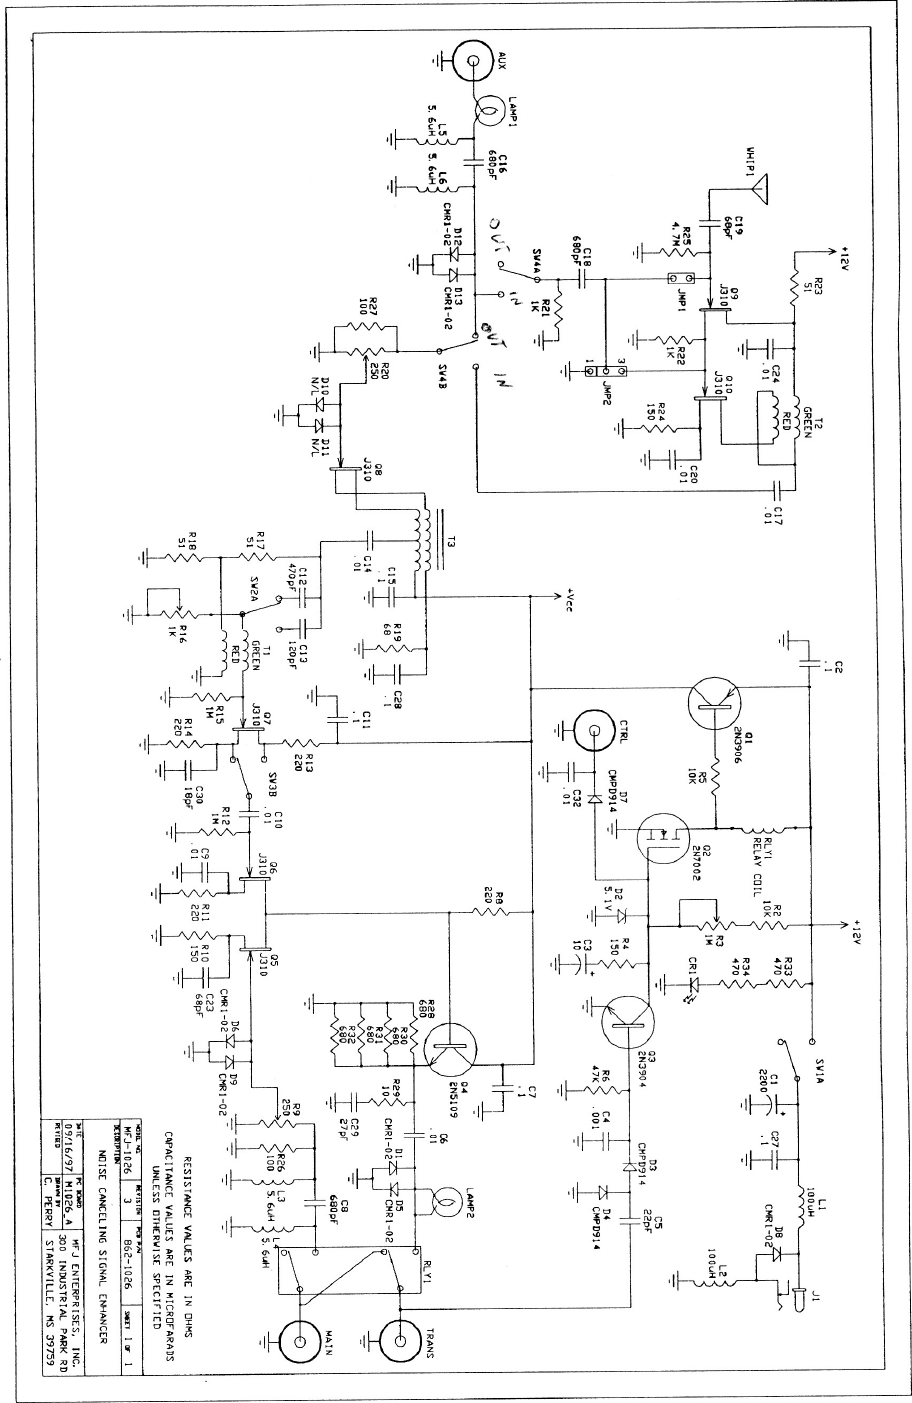 Page 1 of 1 - Weather MFJ-1026-Noise Canceling Signal Schematic